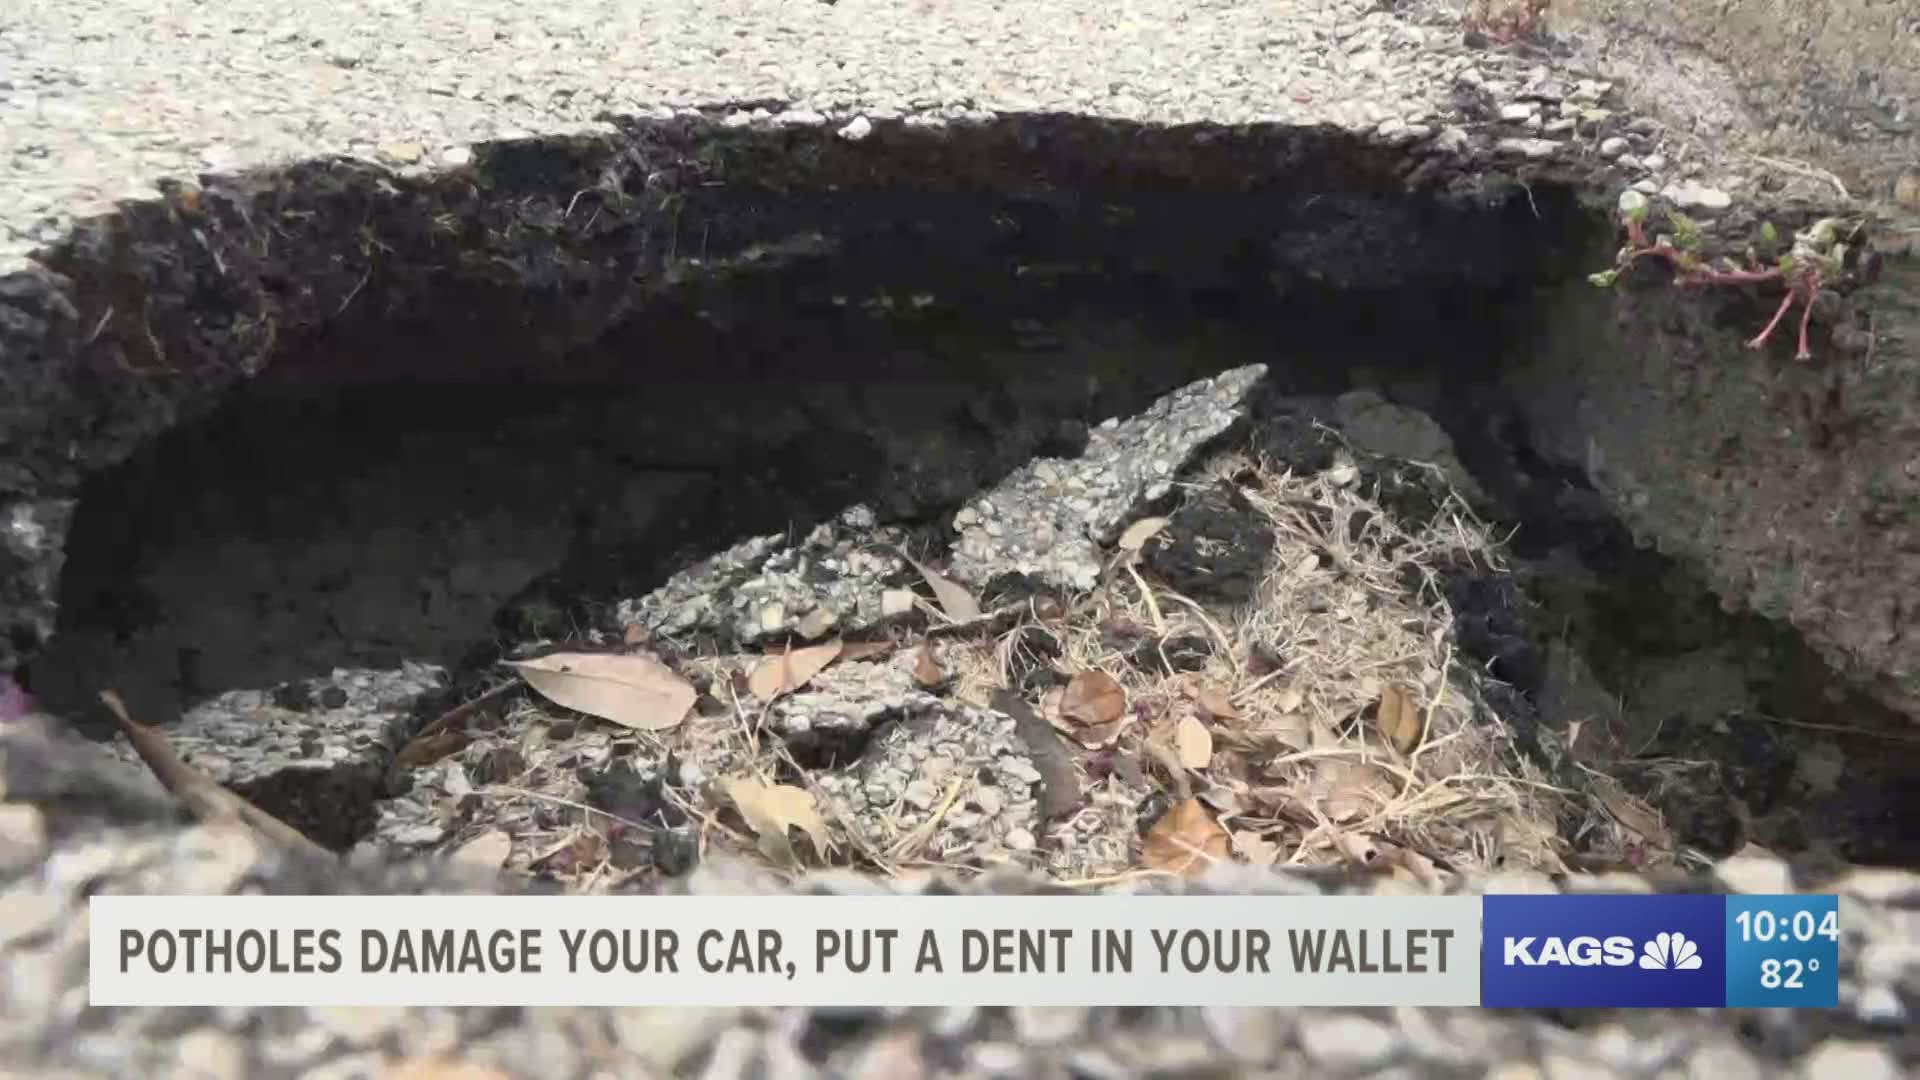 If you hit a pothole, immediately go and get your vehicle checked.